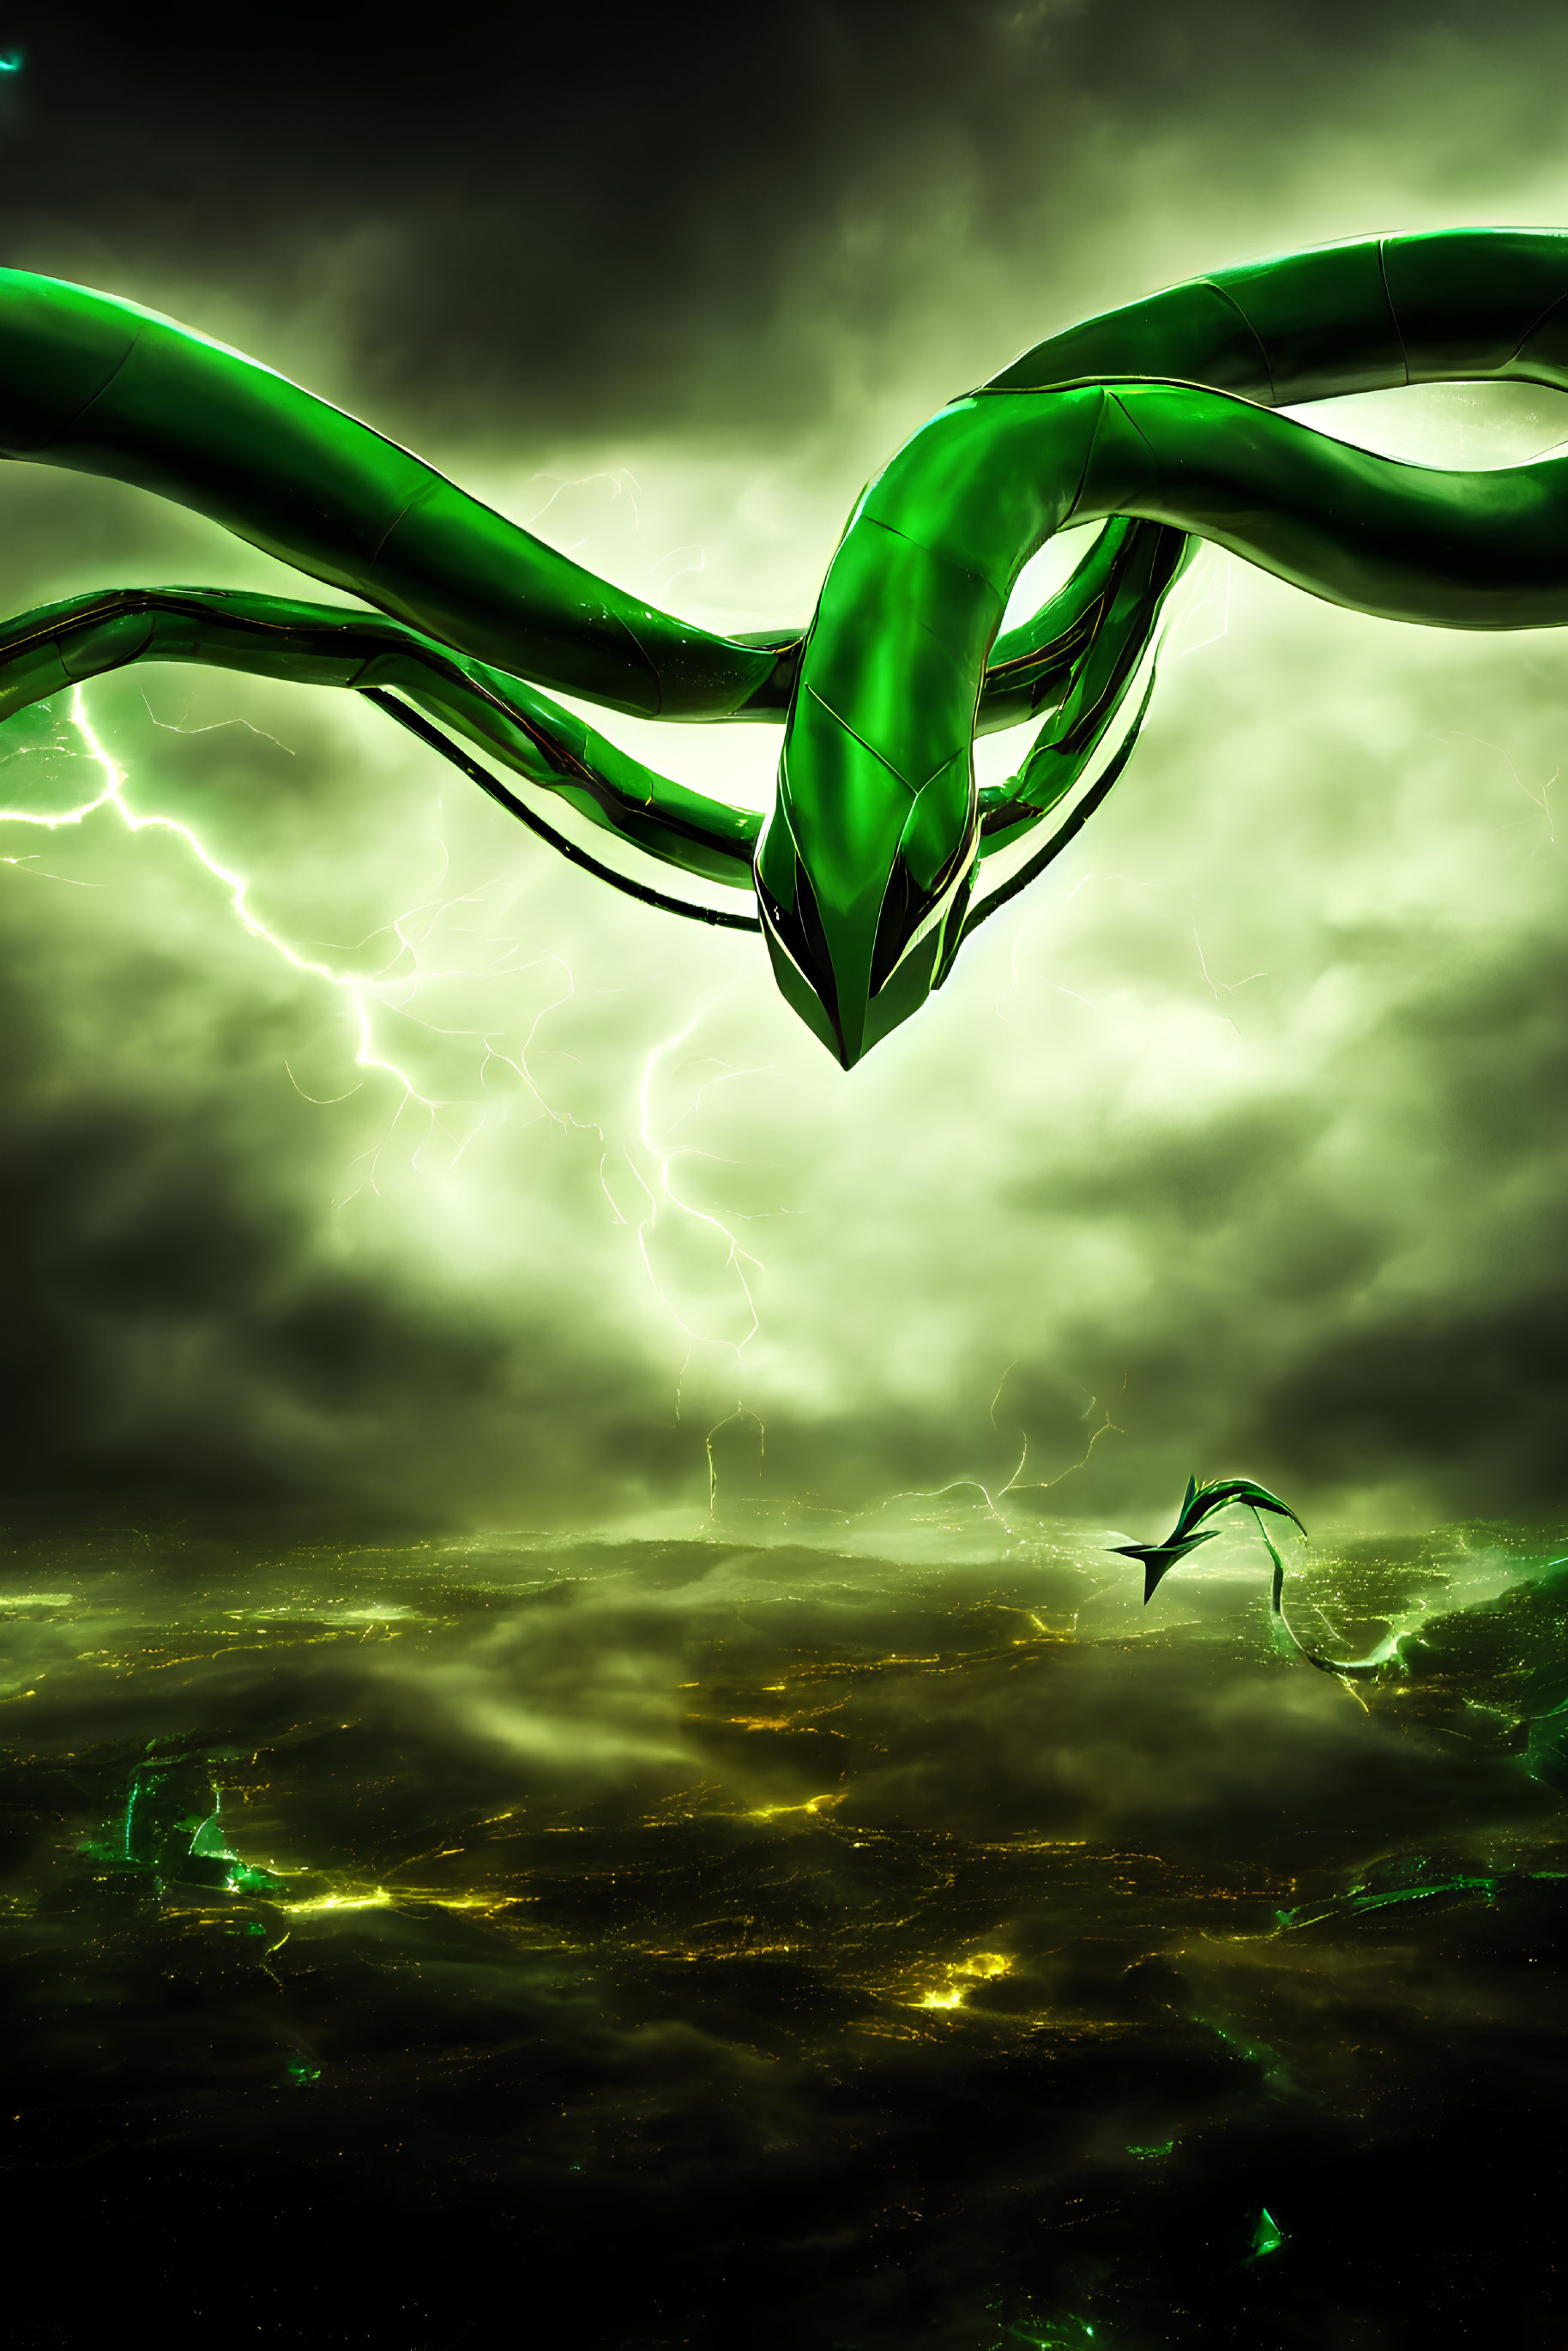 Large green serpentine creatures in stormy sky with lightning bolts